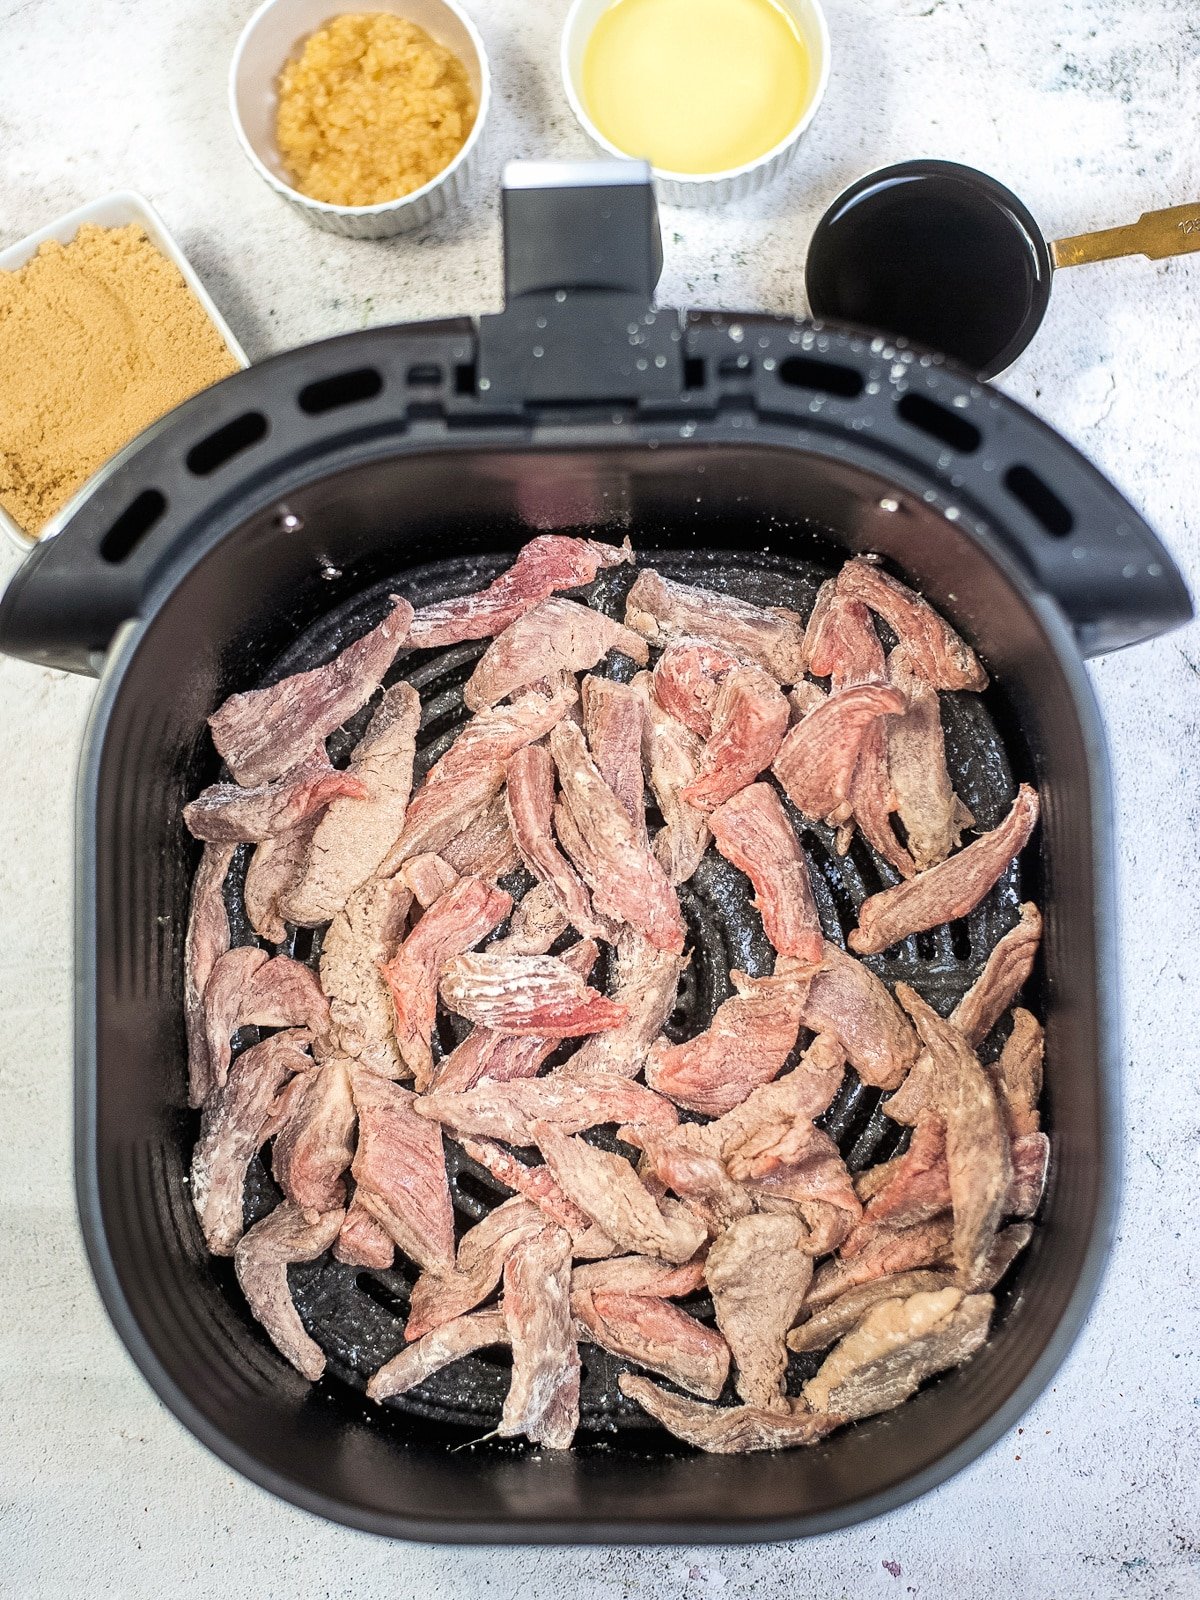 add coated beef to air fryer basket